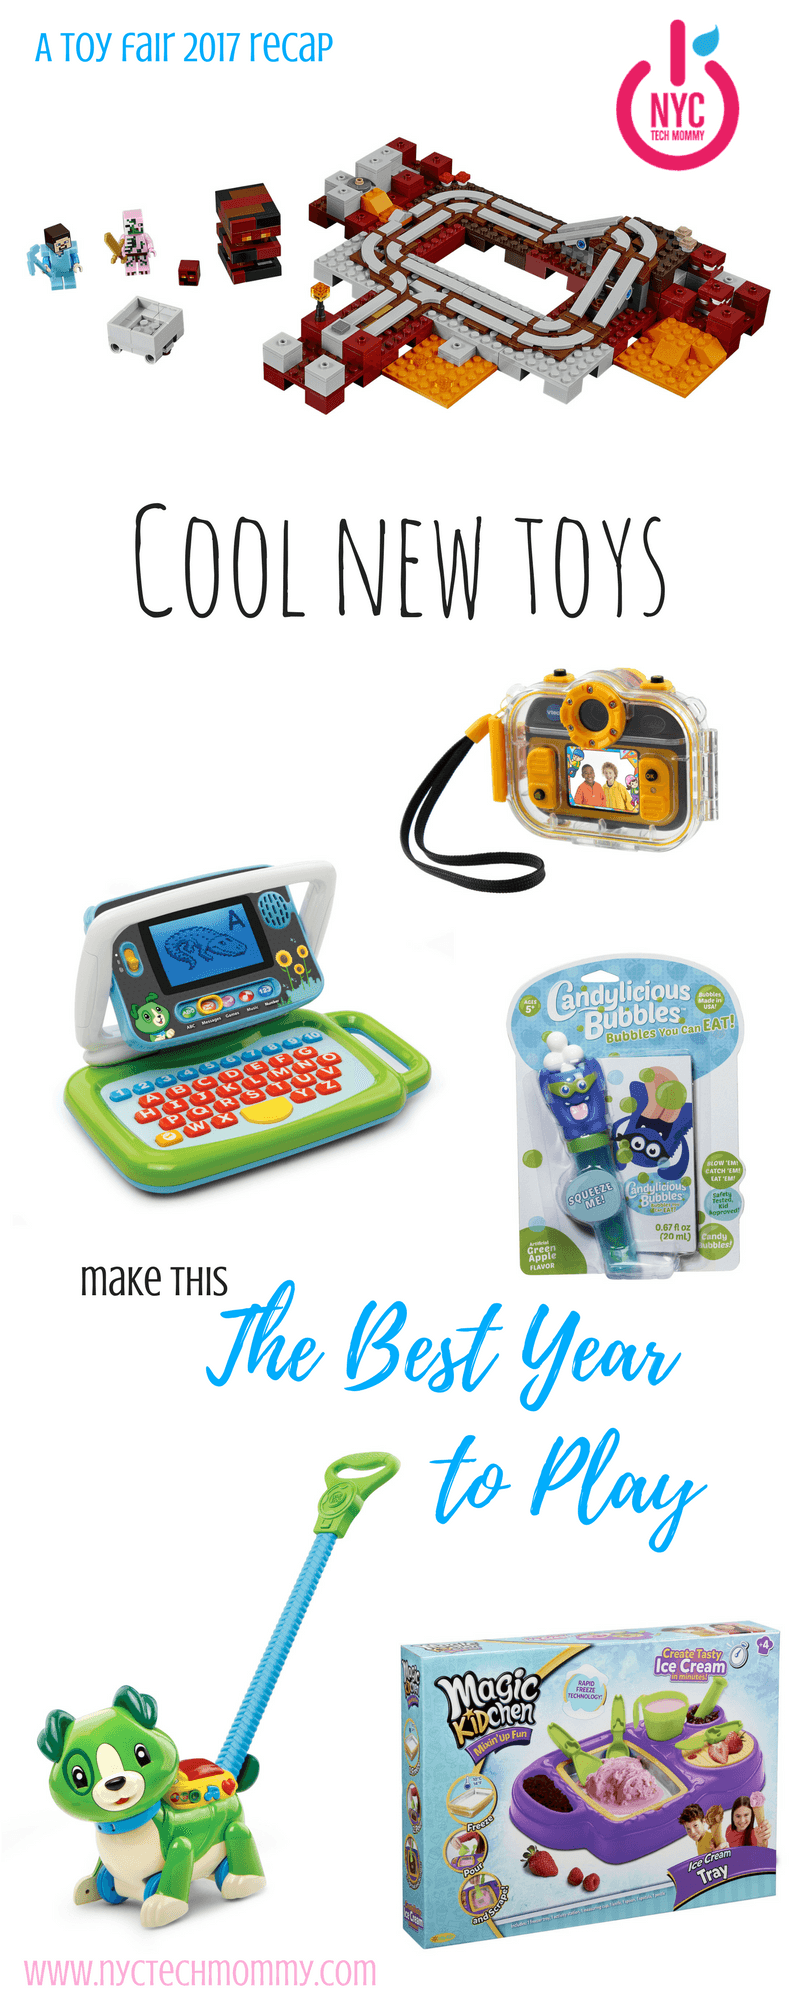 Want to know what toys your kids will be asking for this year? Toy Fair 2017 brought us the coolest new toys that will make this the best year to play! Check out which ones made my list!